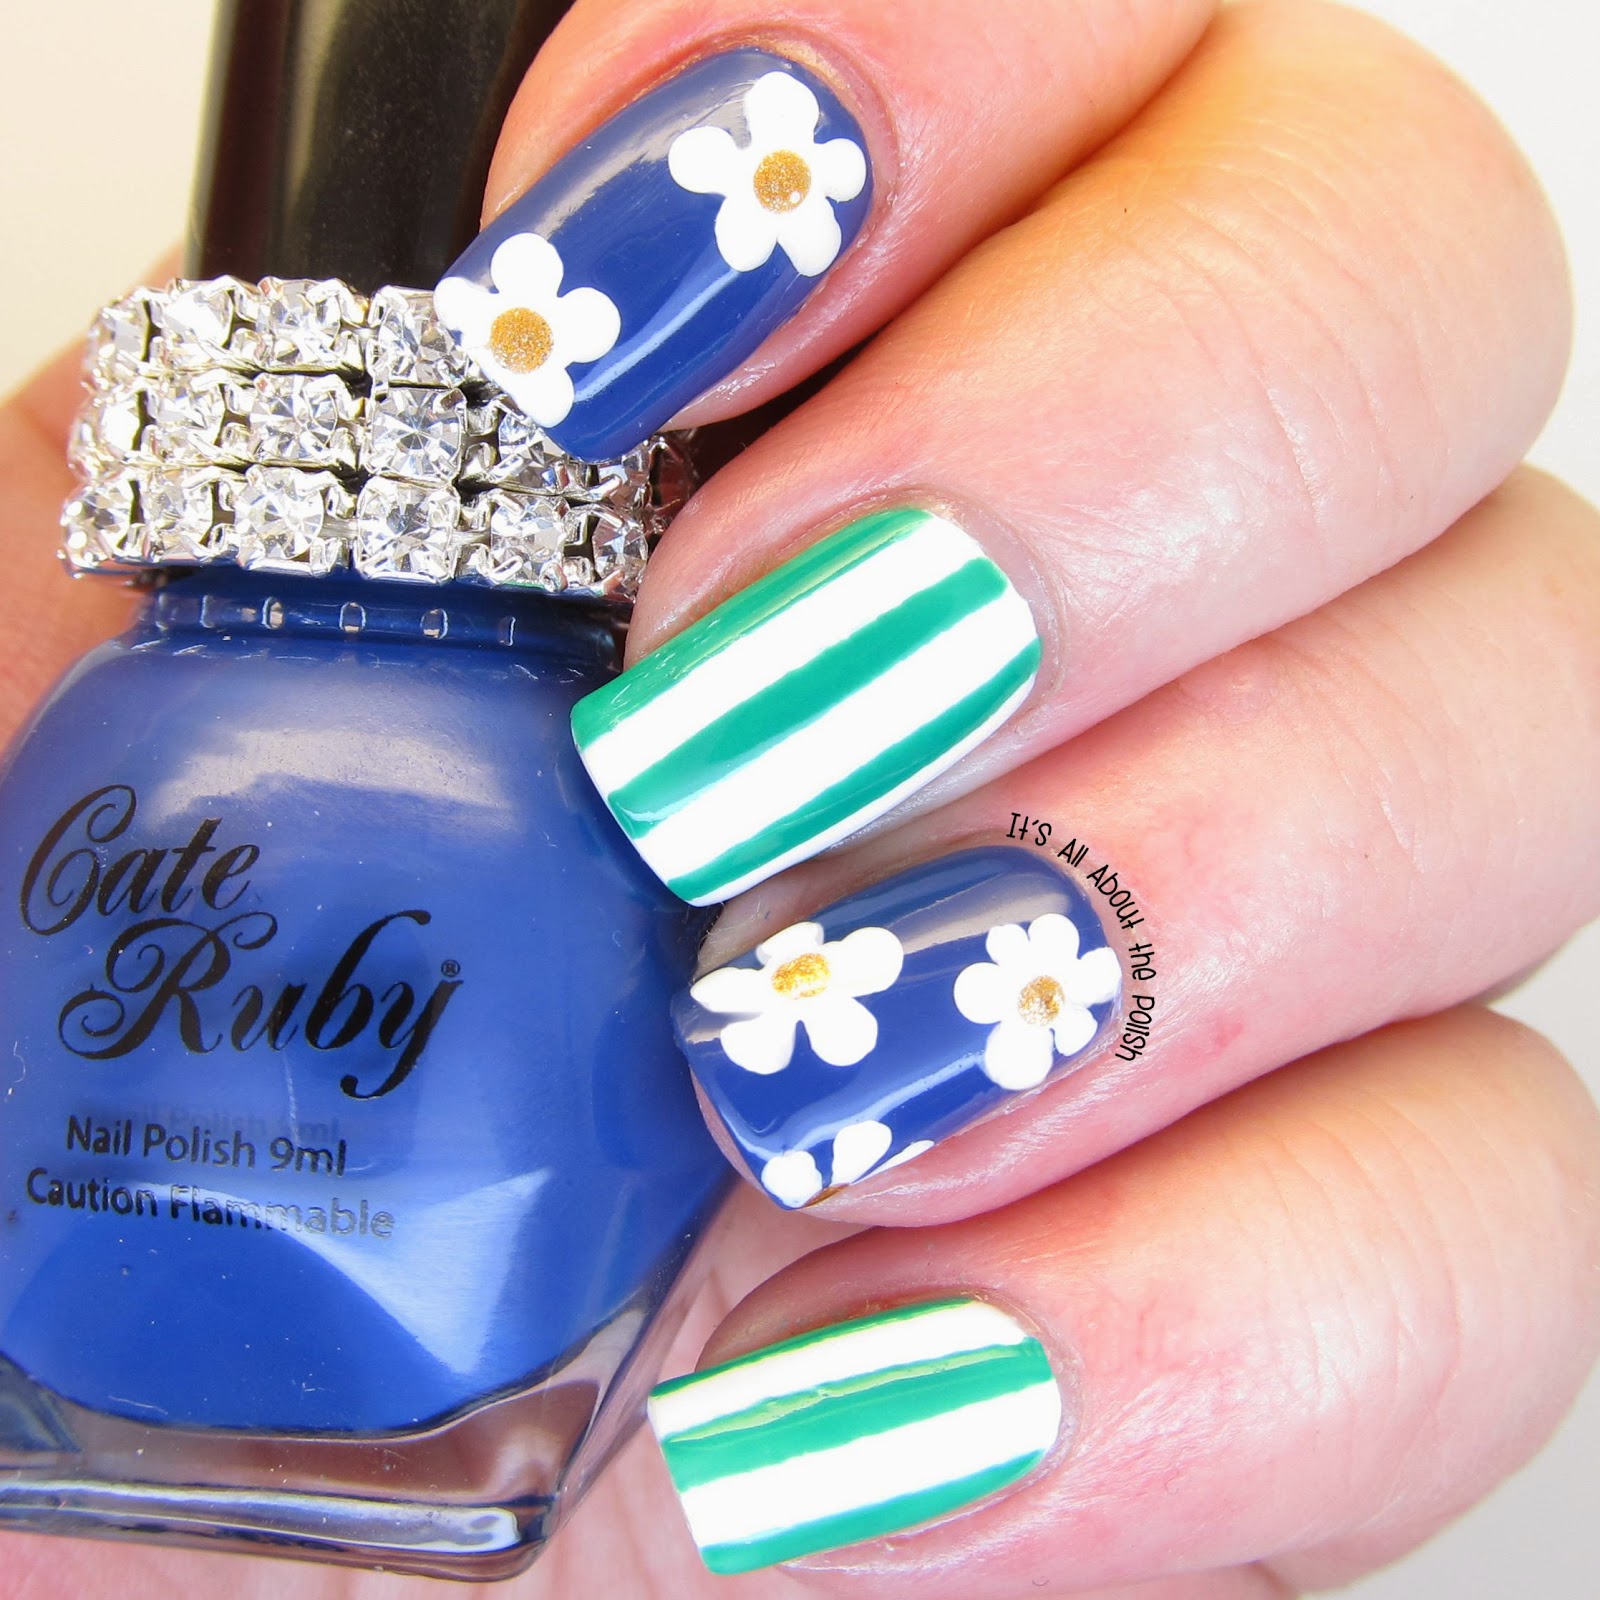 It's all about the polish: Cate Ruby - Prissie Lou and British Blue daisies